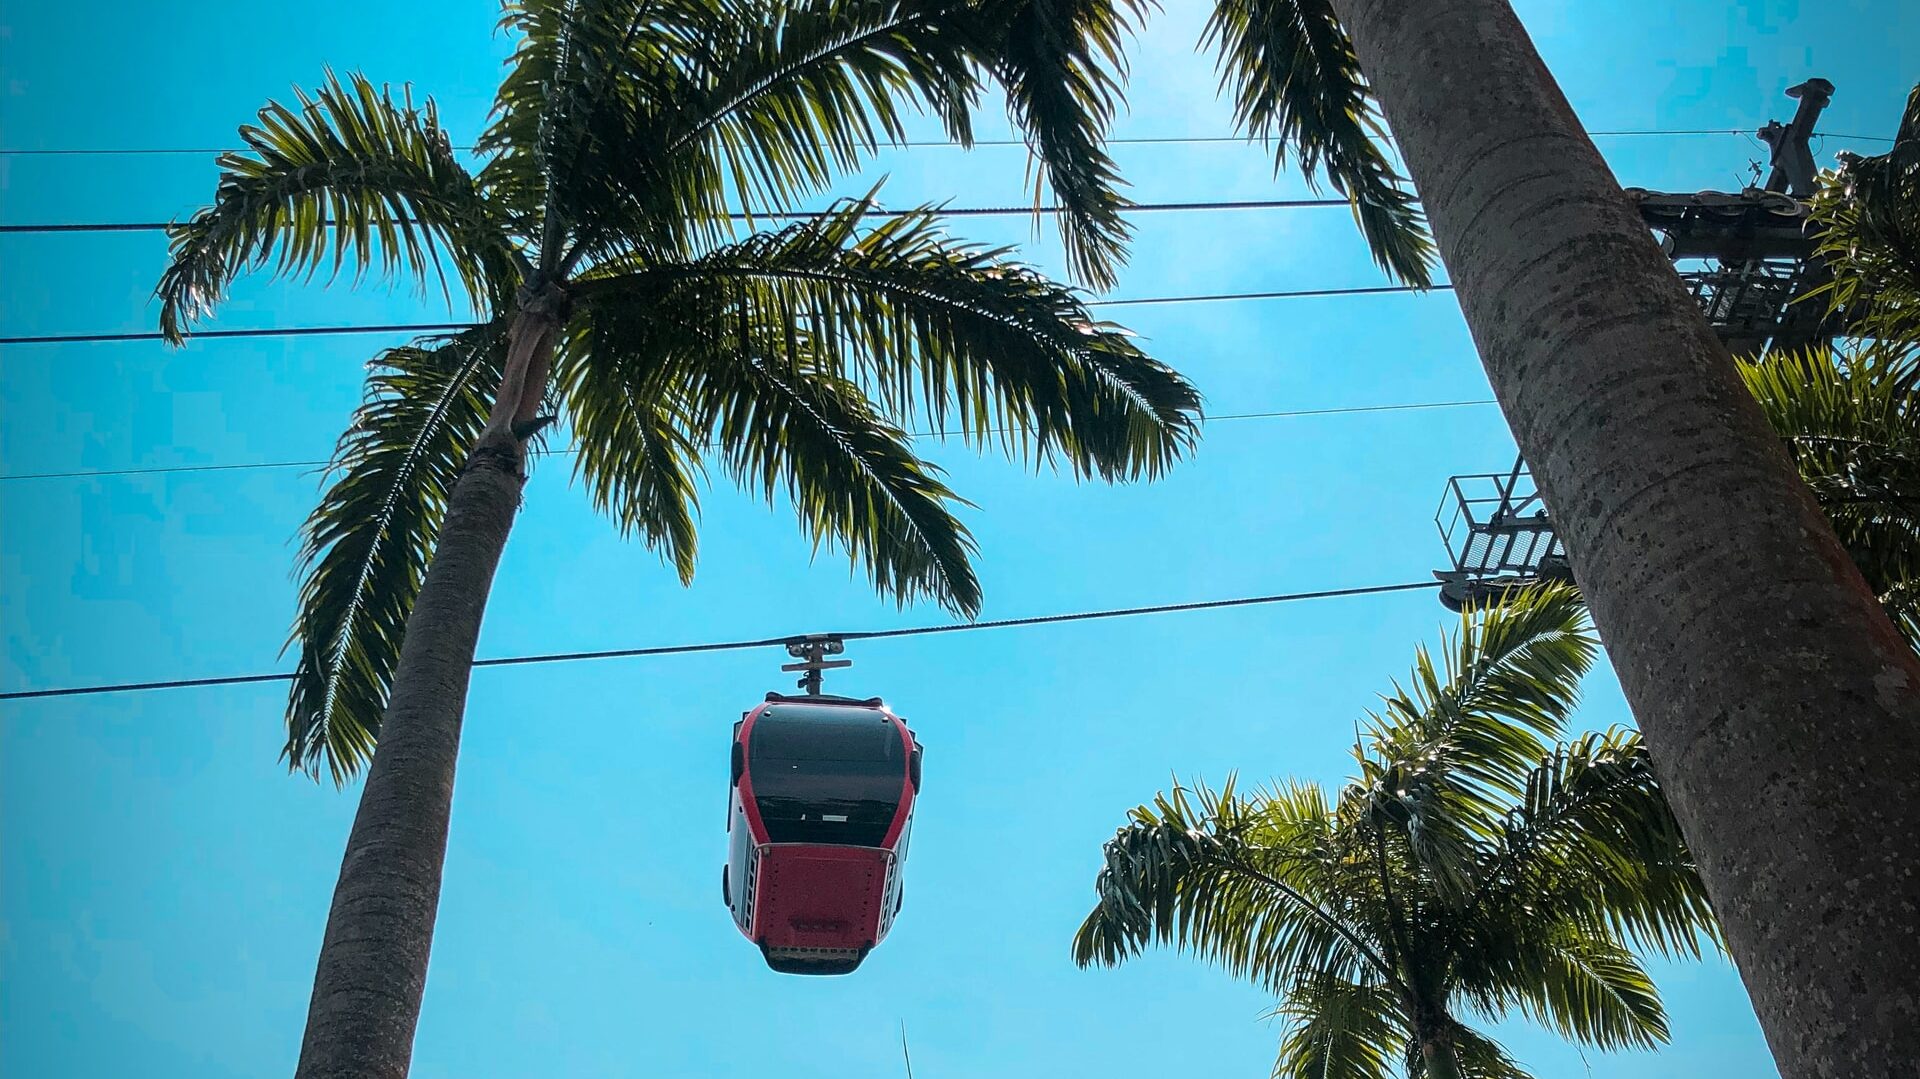 A cable car amongst some trees